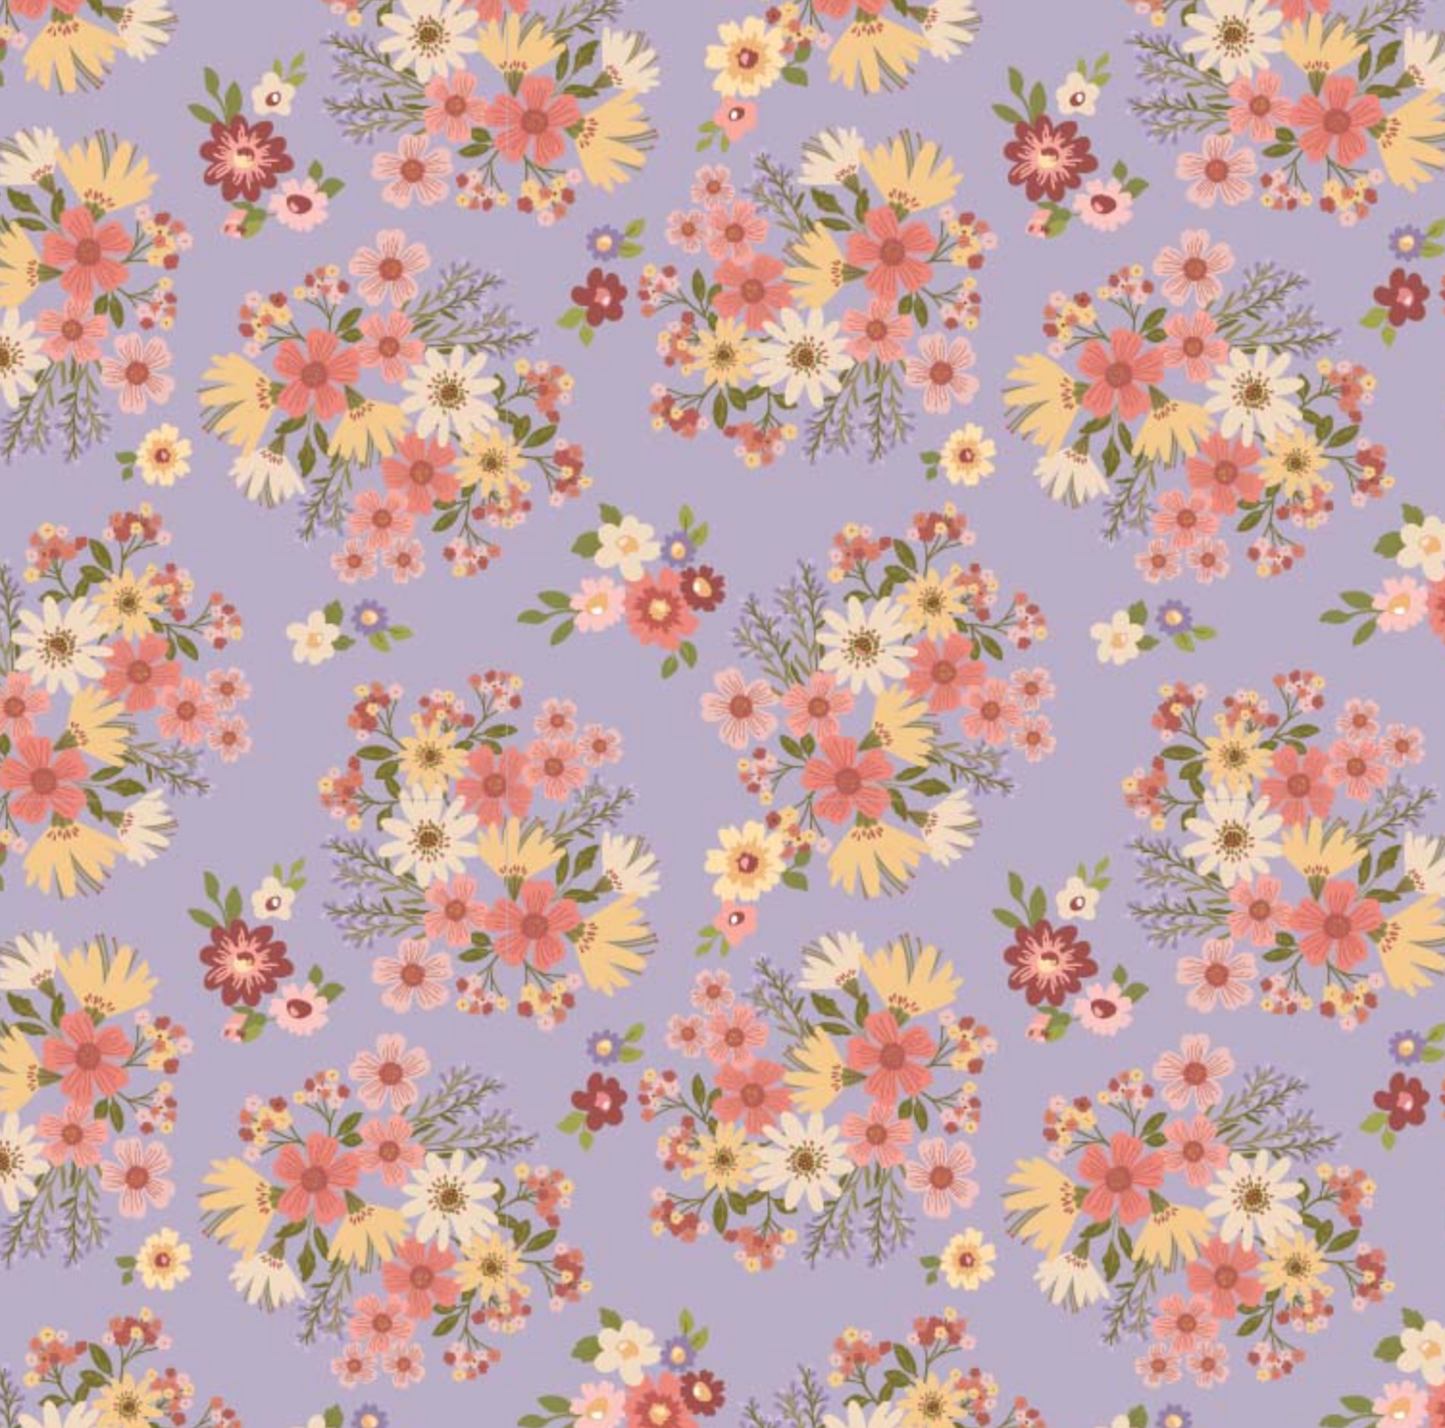 Nature Sings Fabric, Send Her Flowers, Lavender, NS24100, sold by the 1/2 yard, *PREORDER